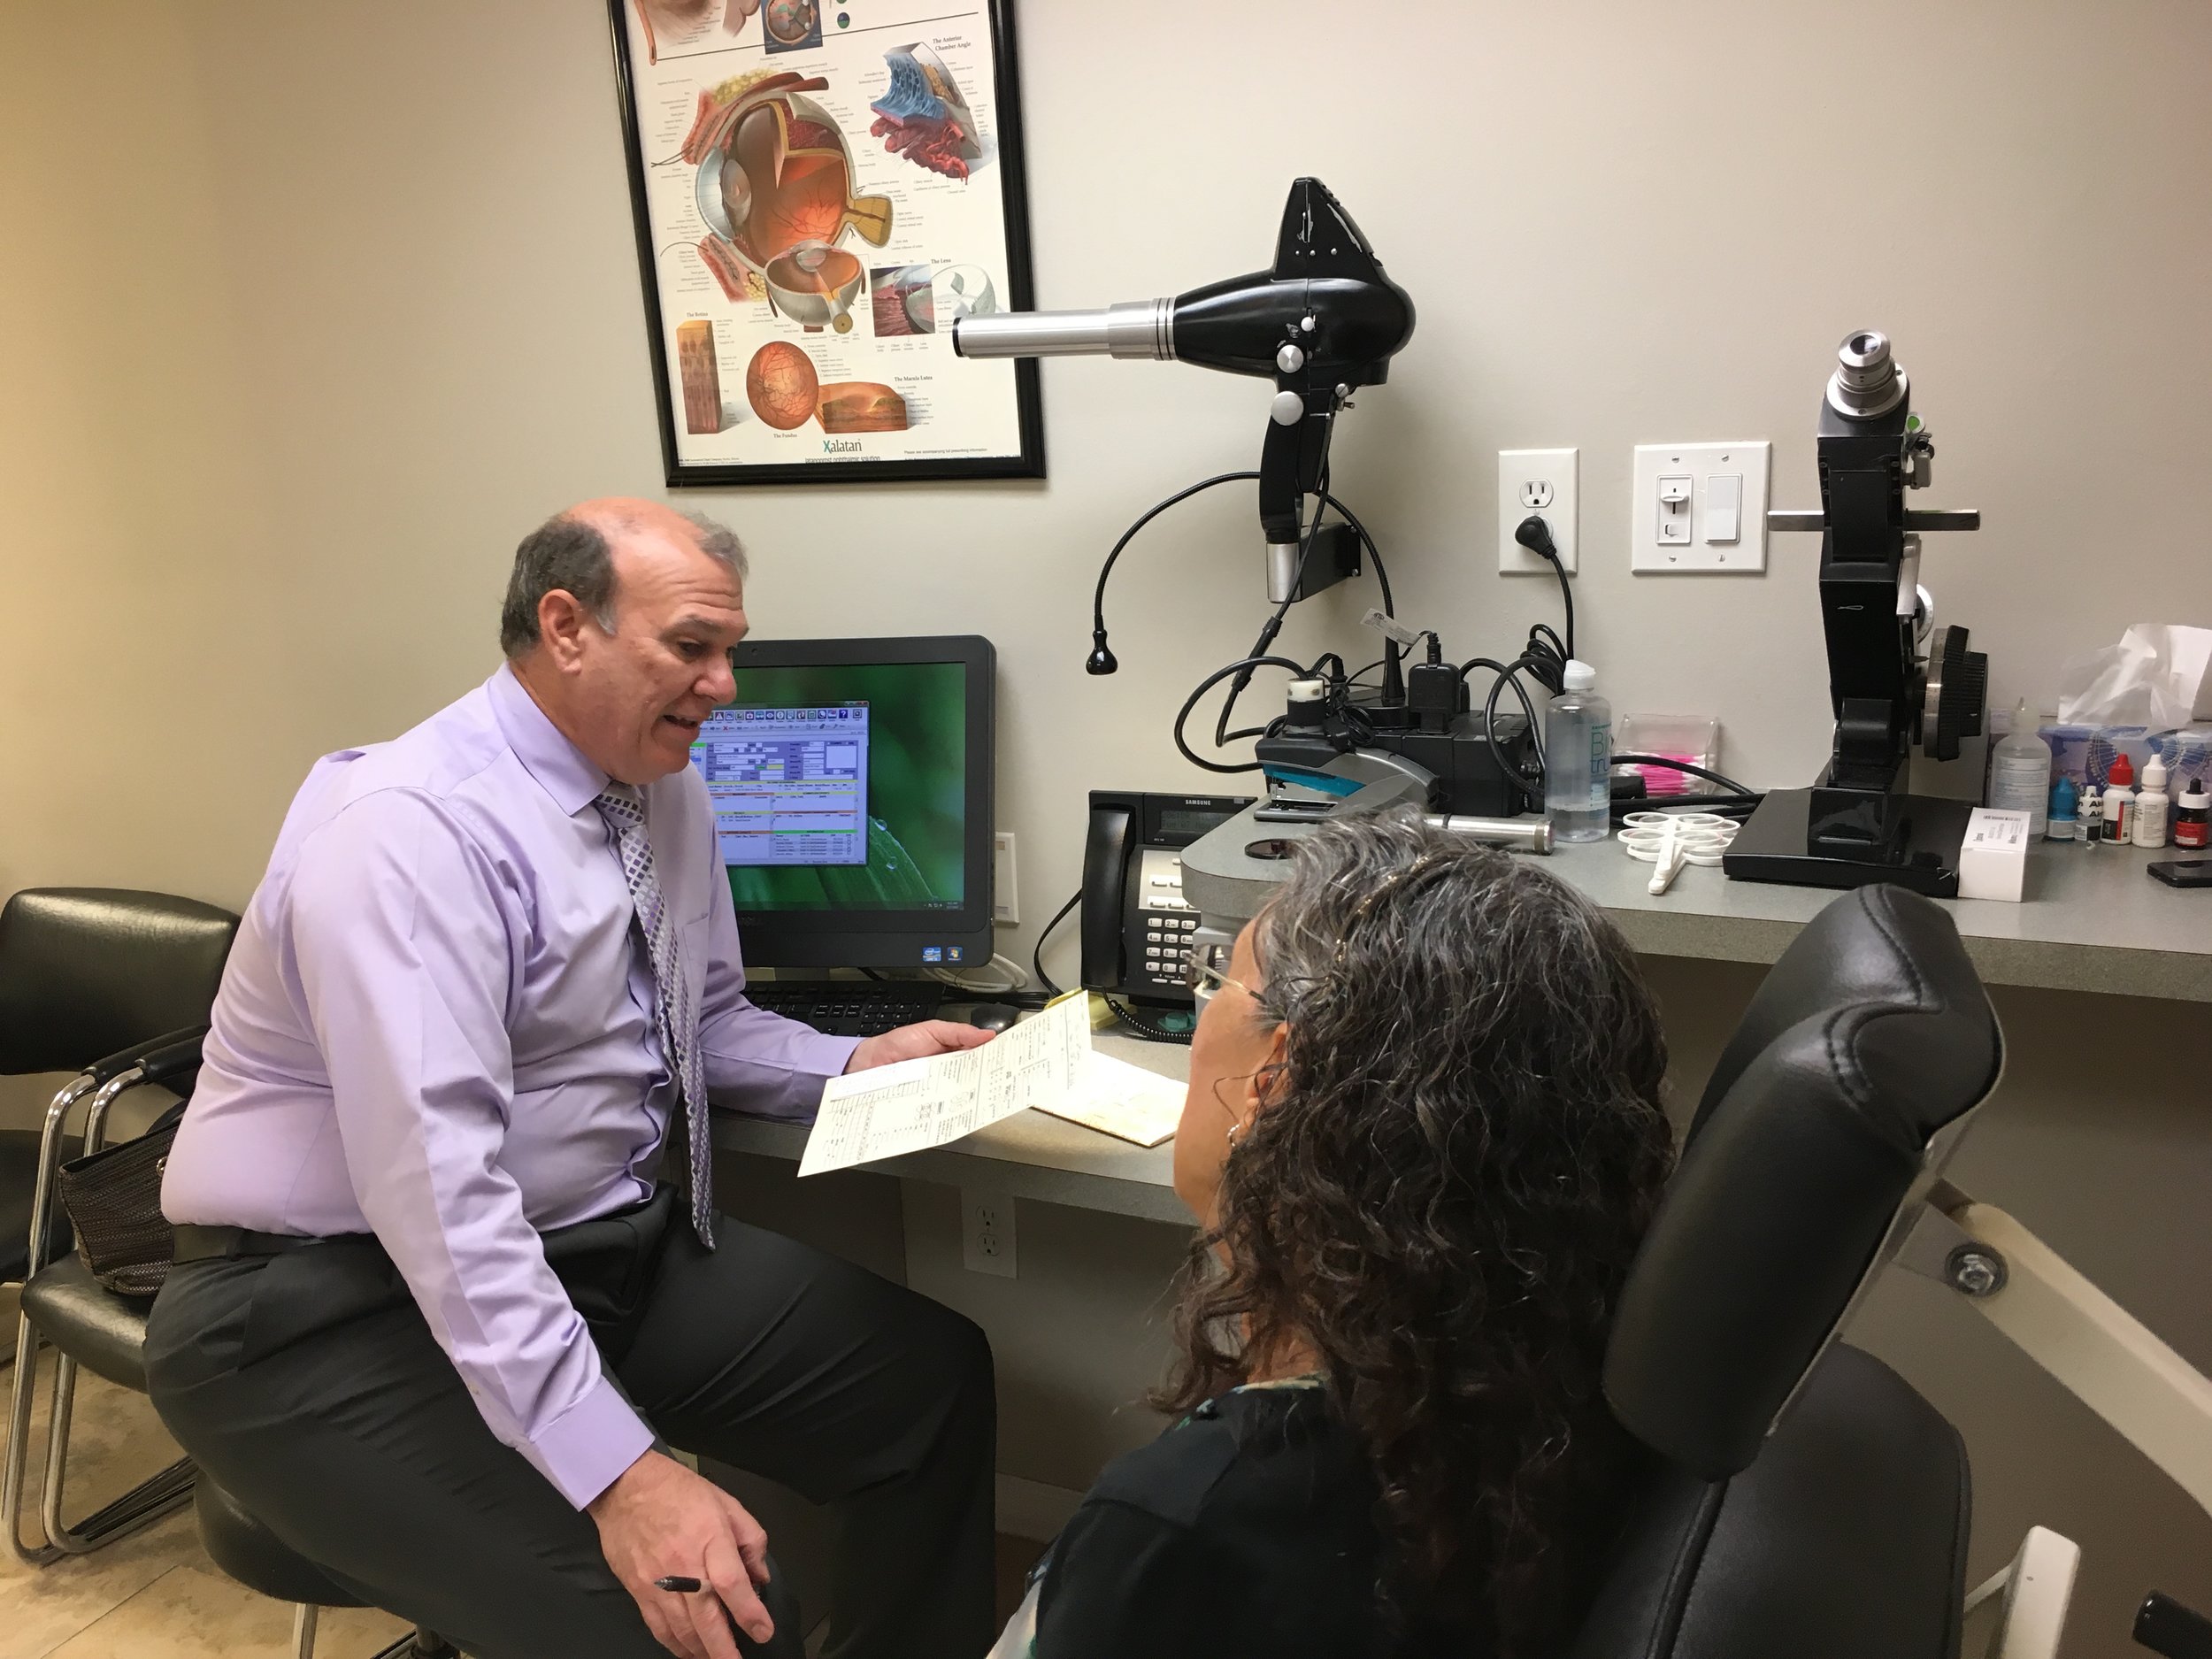  Dr. Ricardo Silva, Optometrist who's family practice is located in Miami, that specializes in Contact Lenses and glasses prescriptions.&nbsp; His specialty is with Toric, Multi-focal Lenses, and eye conditions such as Keratoconus but also provides e